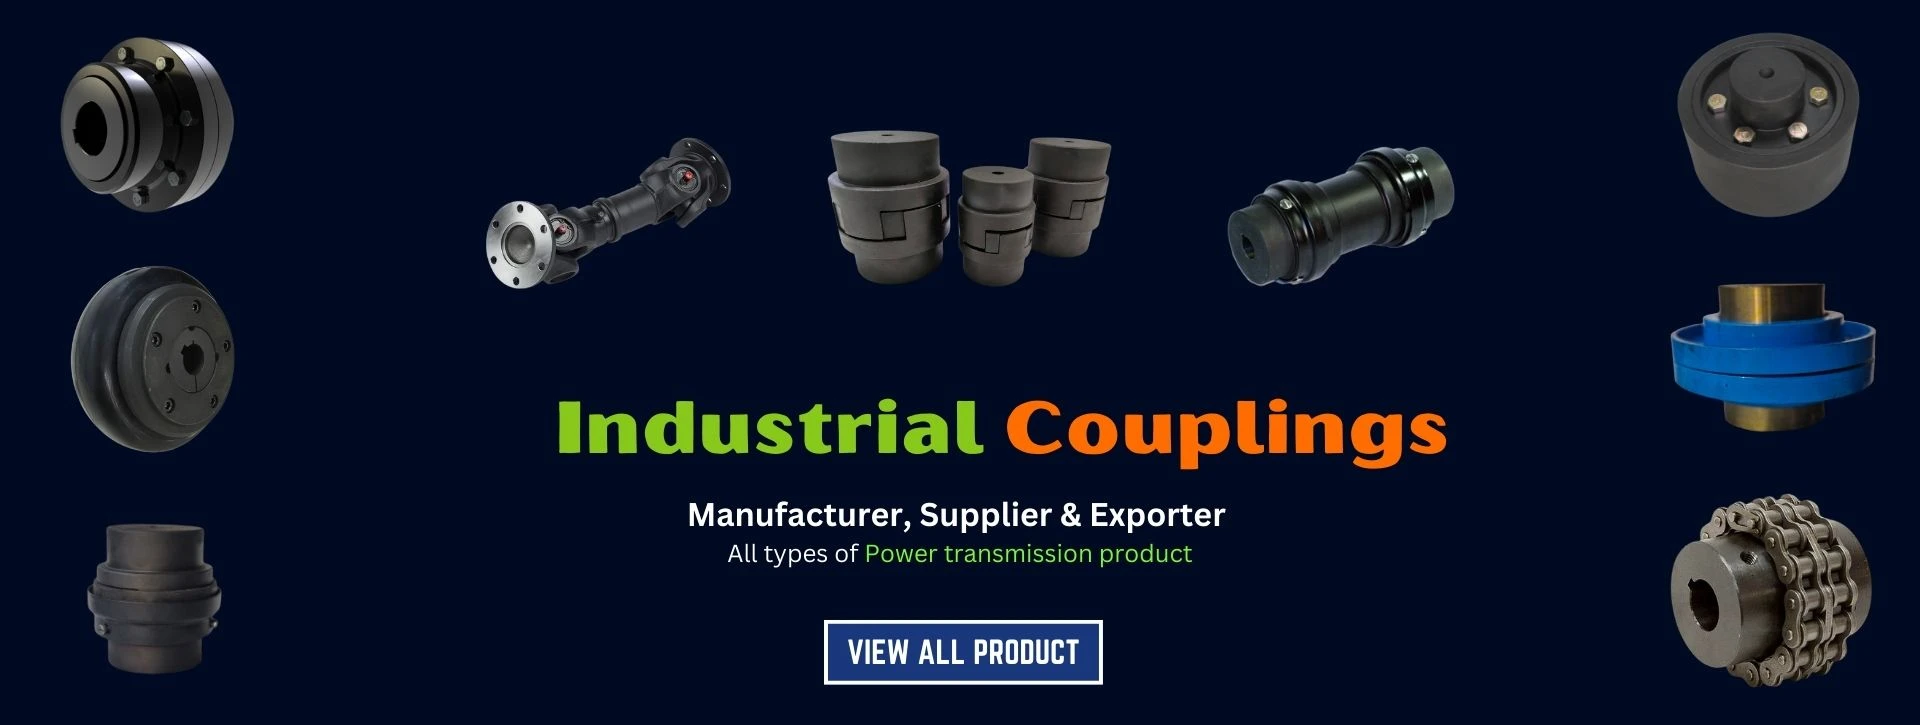 All types of industrial couplings are shown by leading coupling manufacturer known as anant engineering